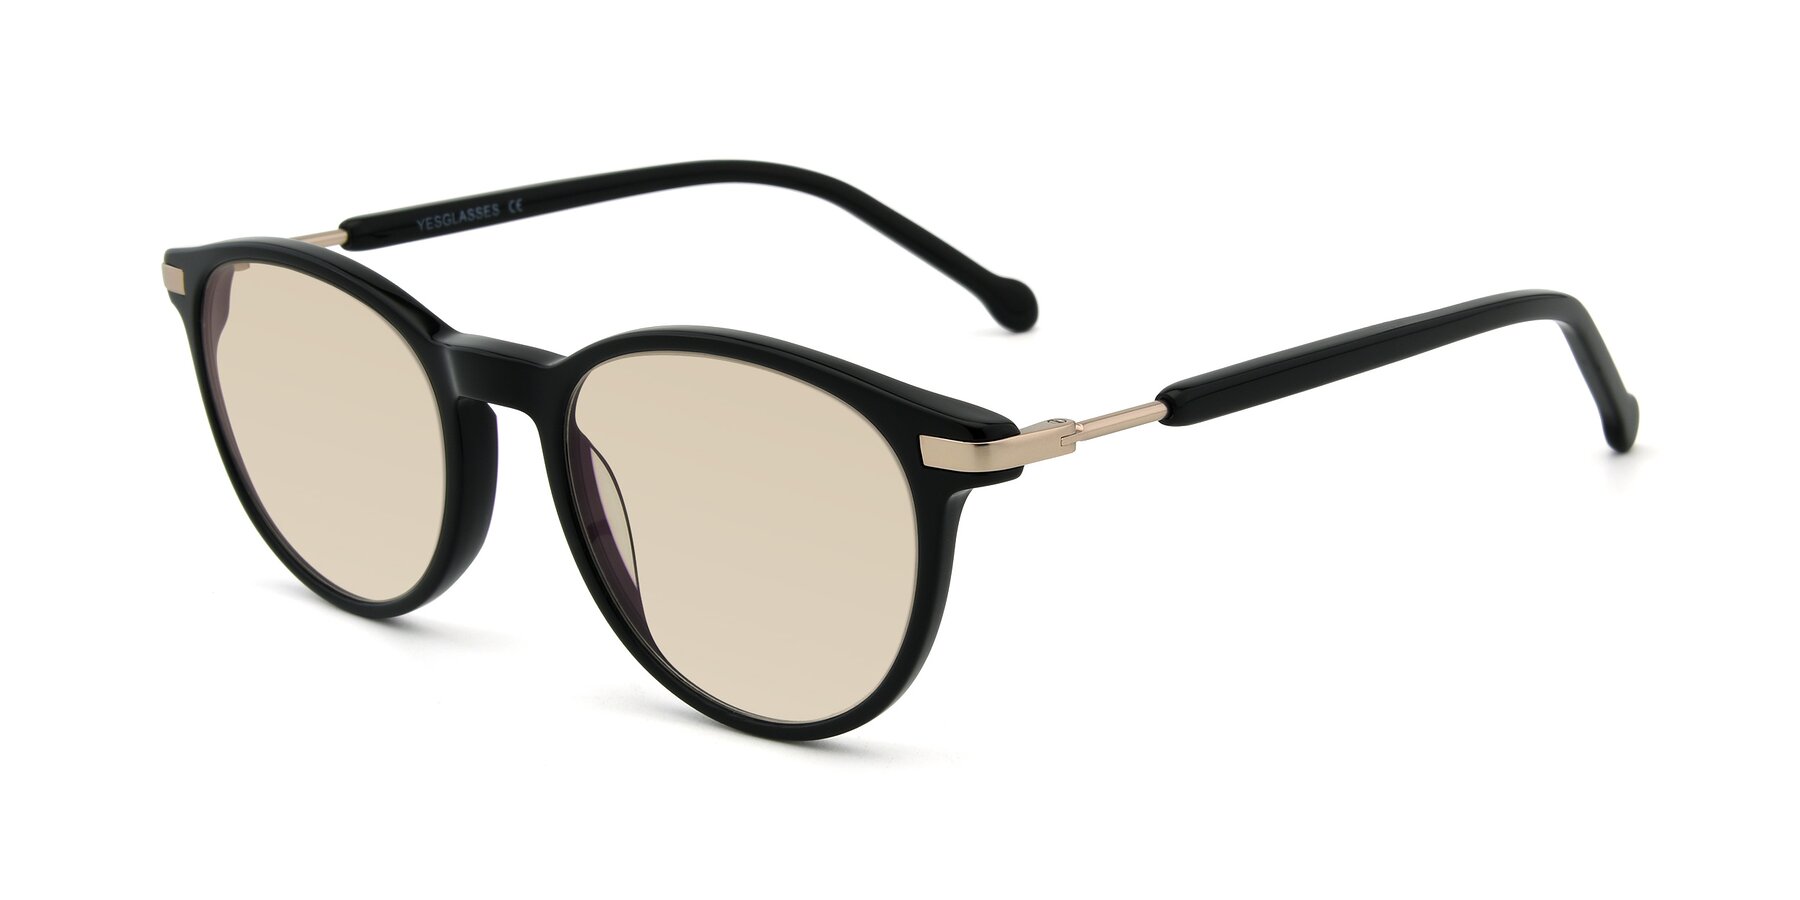 Angle of 17429 in Black with Light Brown Tinted Lenses